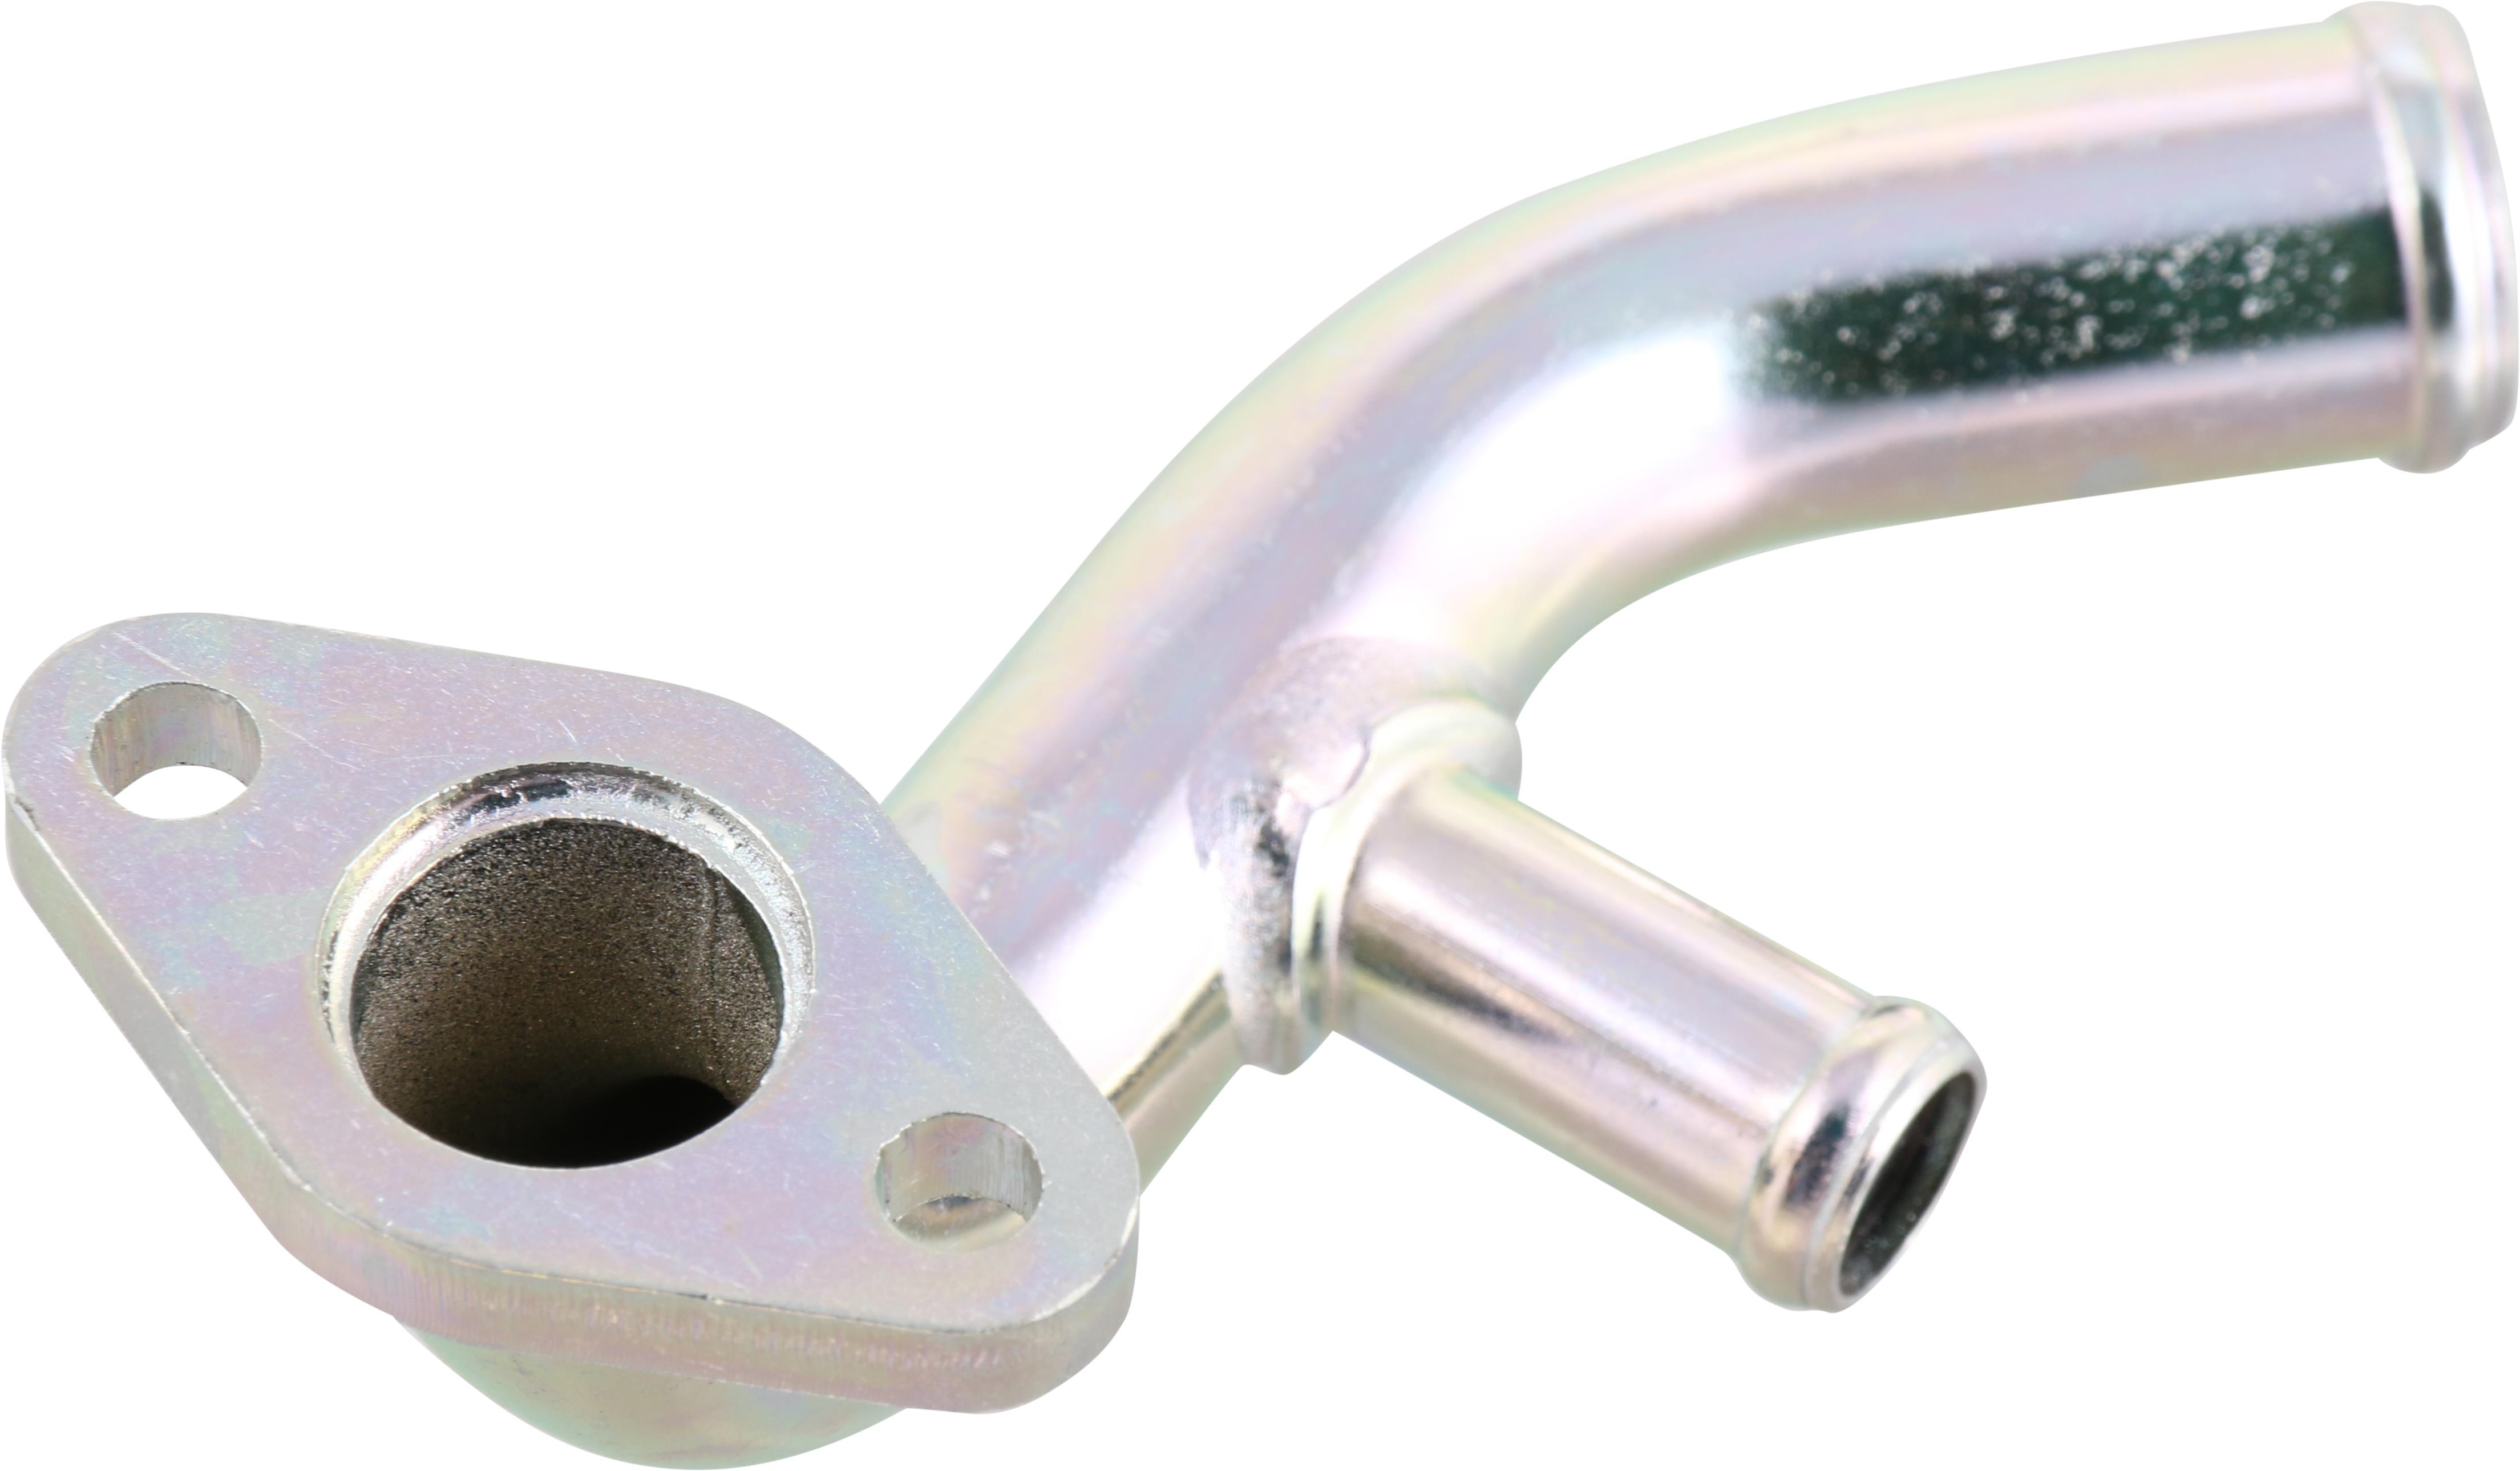 Part 3.3L SE 2002 - Heater Nissan Crew Feed Nissan 14053-4S160 - V6 Frontier Pipe AT 4WD Cab Genuine